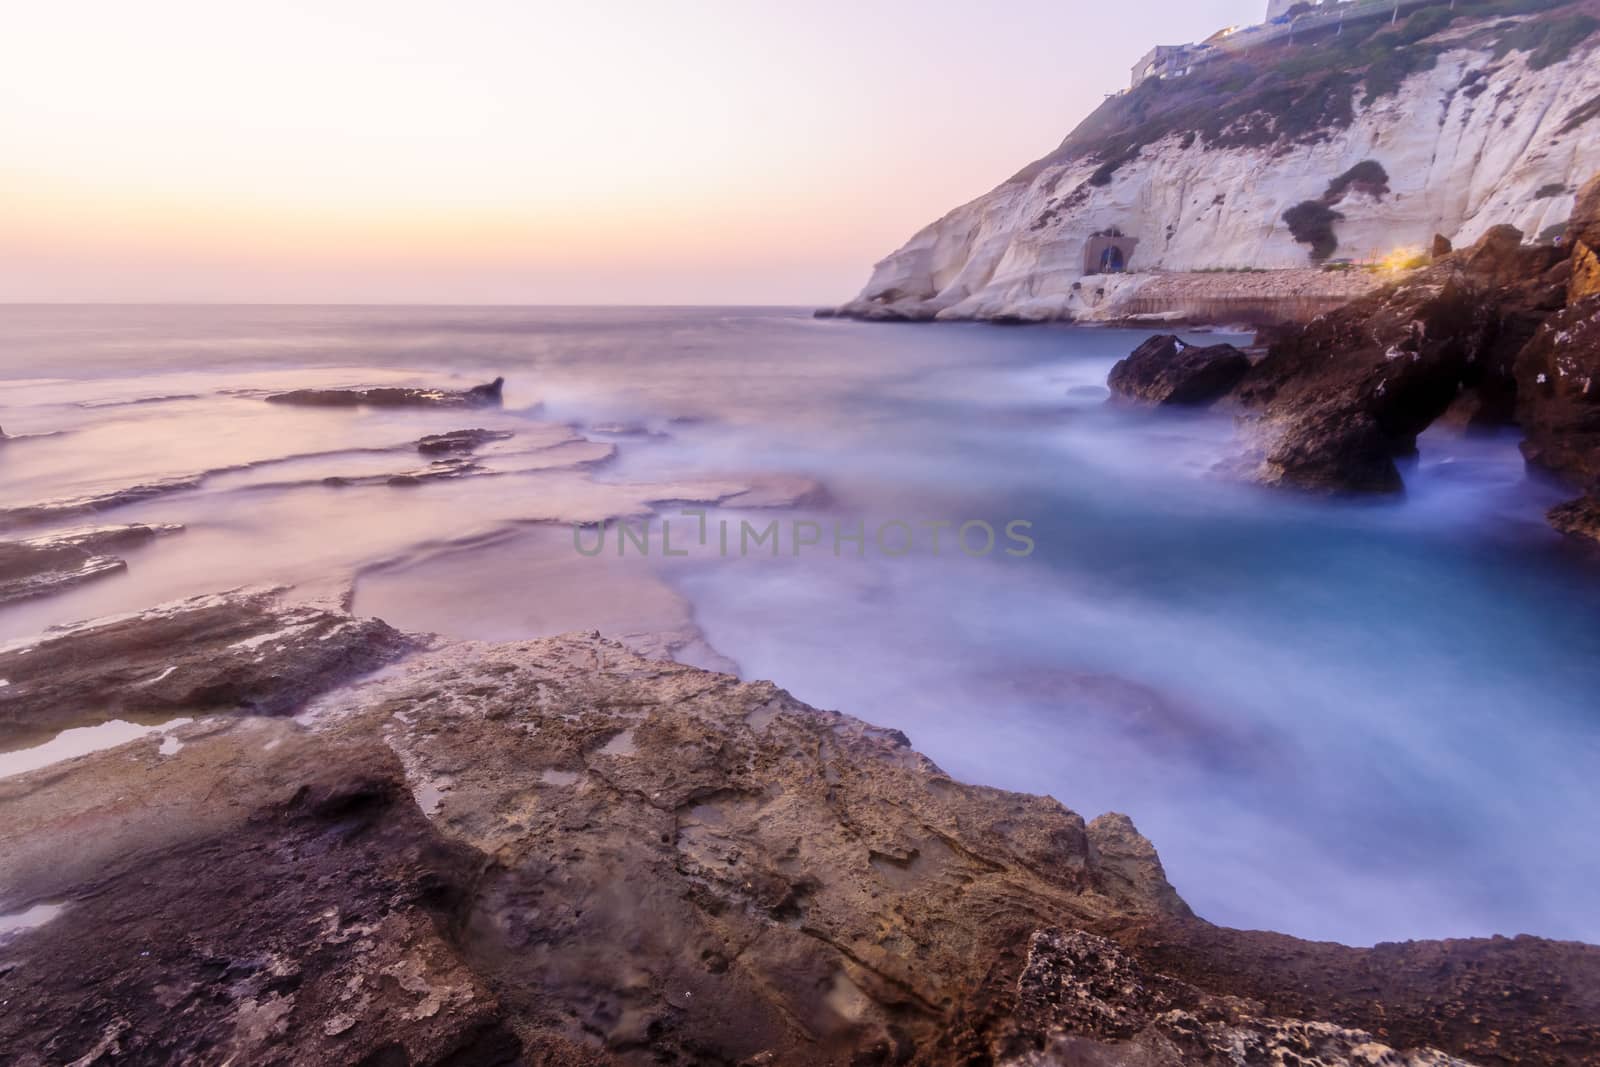 View of the blue hour (after sunset) with the coast and cliffs of Rosh HaNikra, Northern Israel